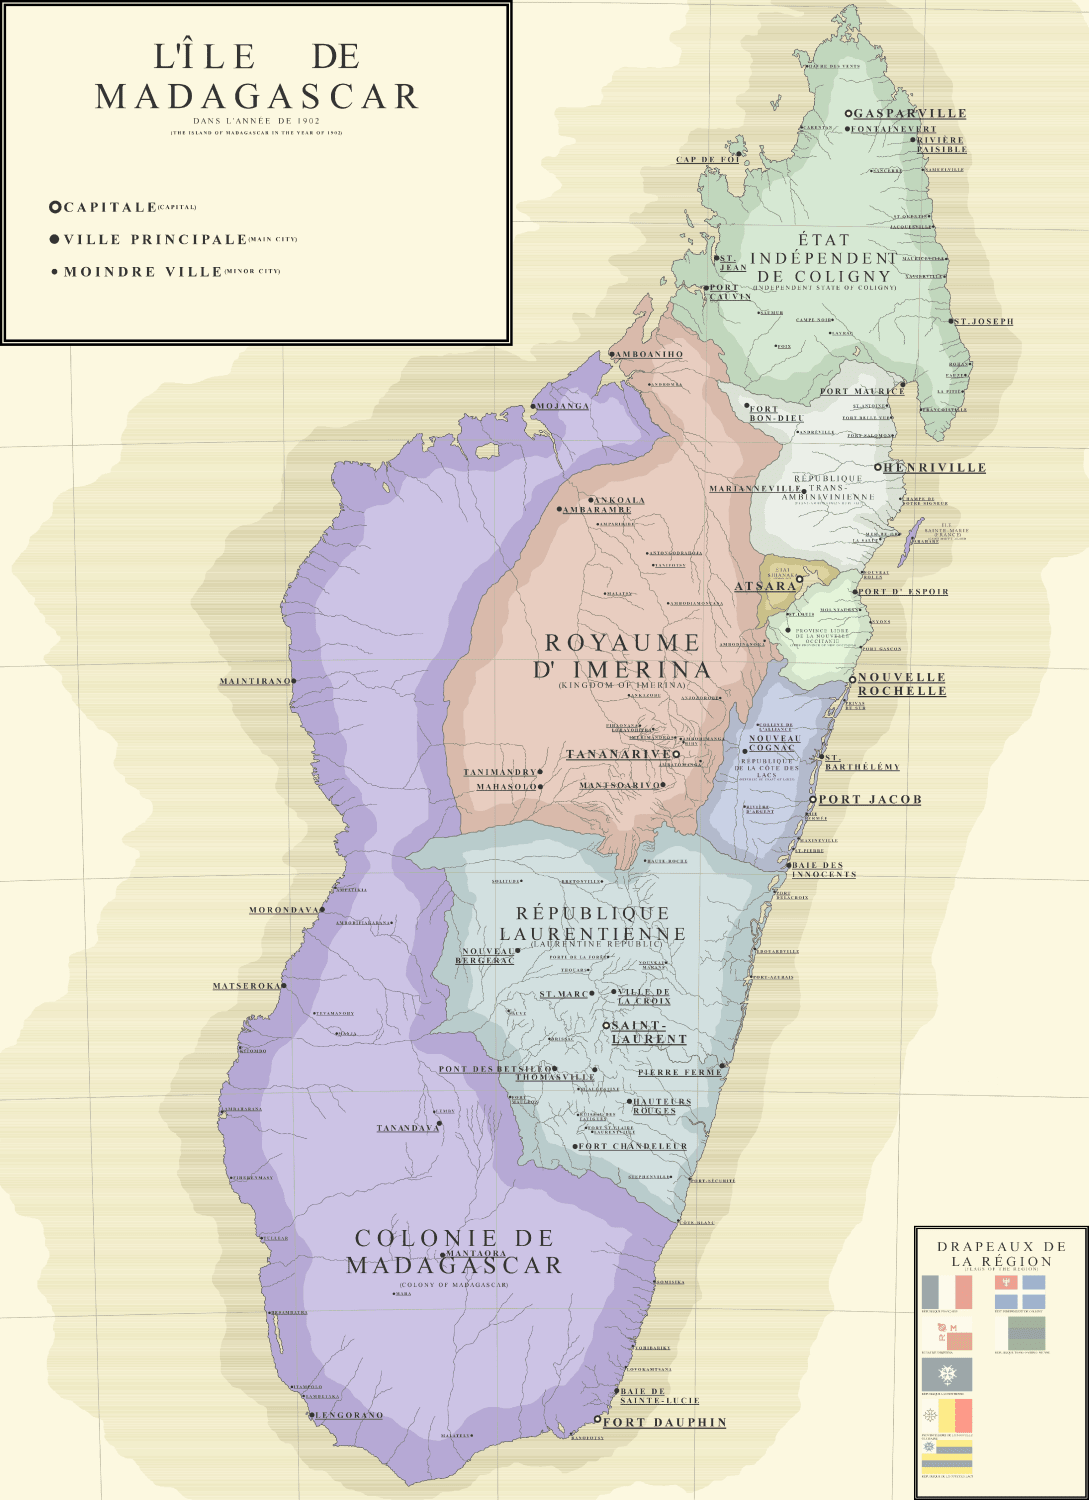 The Island of Madagascar in 1902, on the eve of the Third Huguenot War